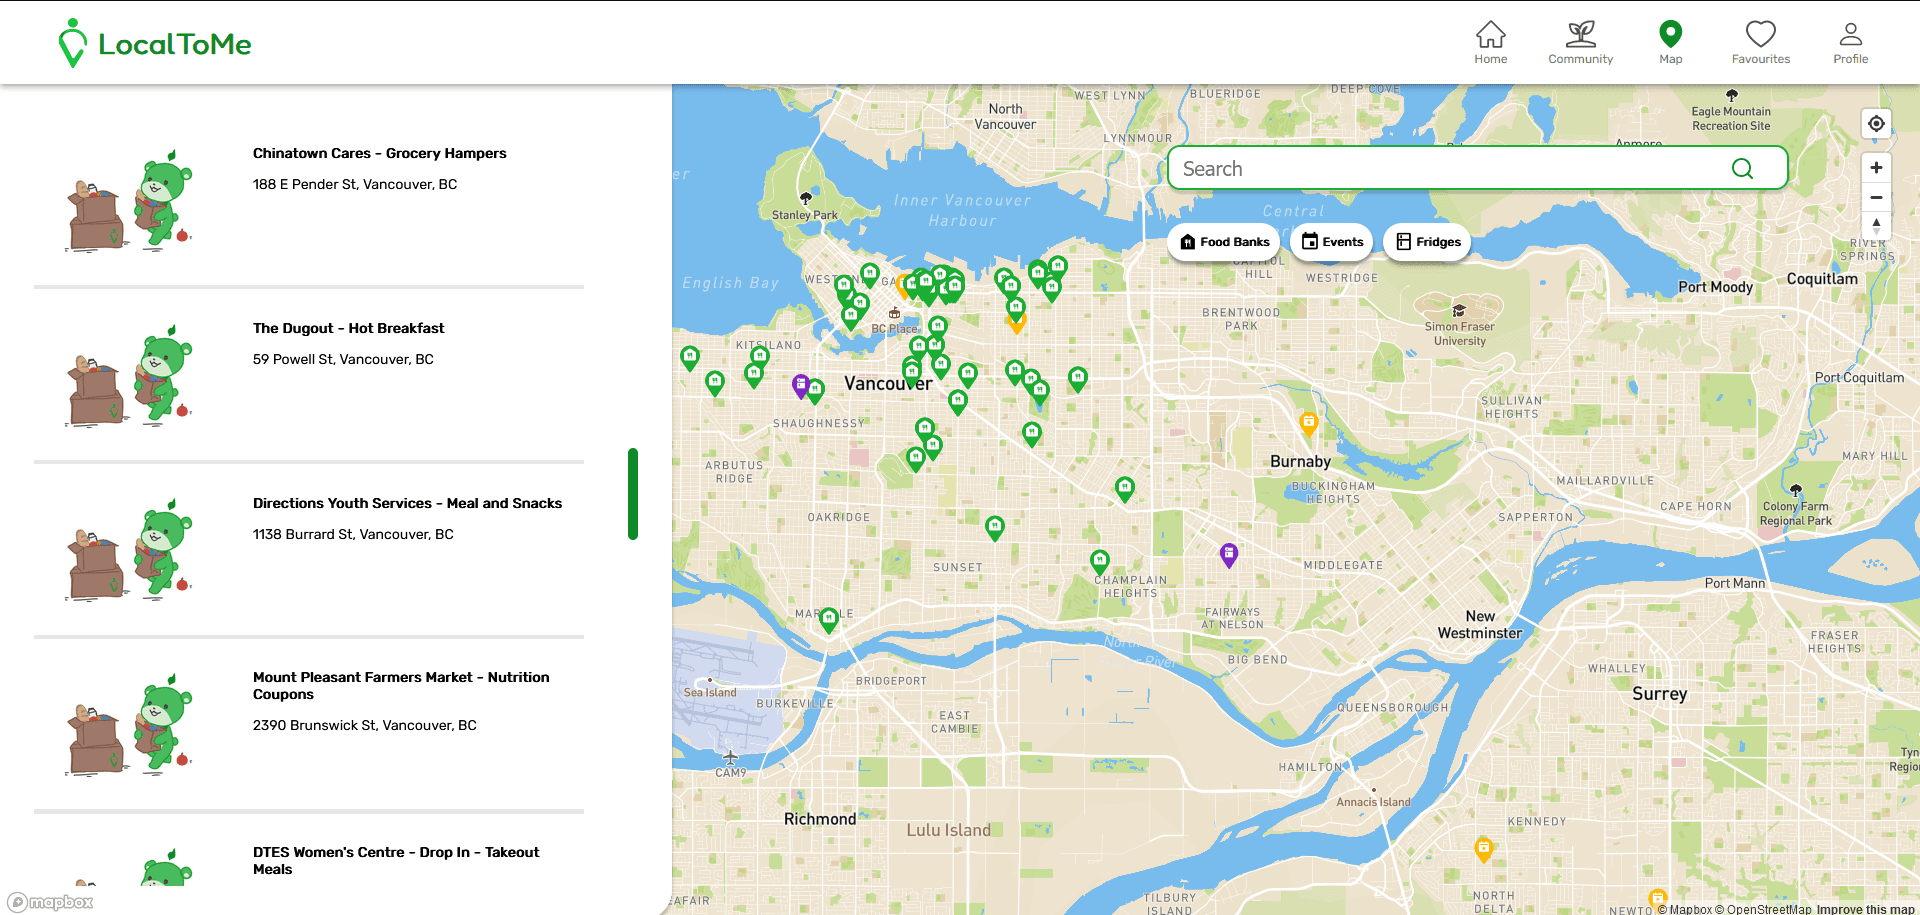 LocalToMe's map showing all the available food resources near Vancouver.